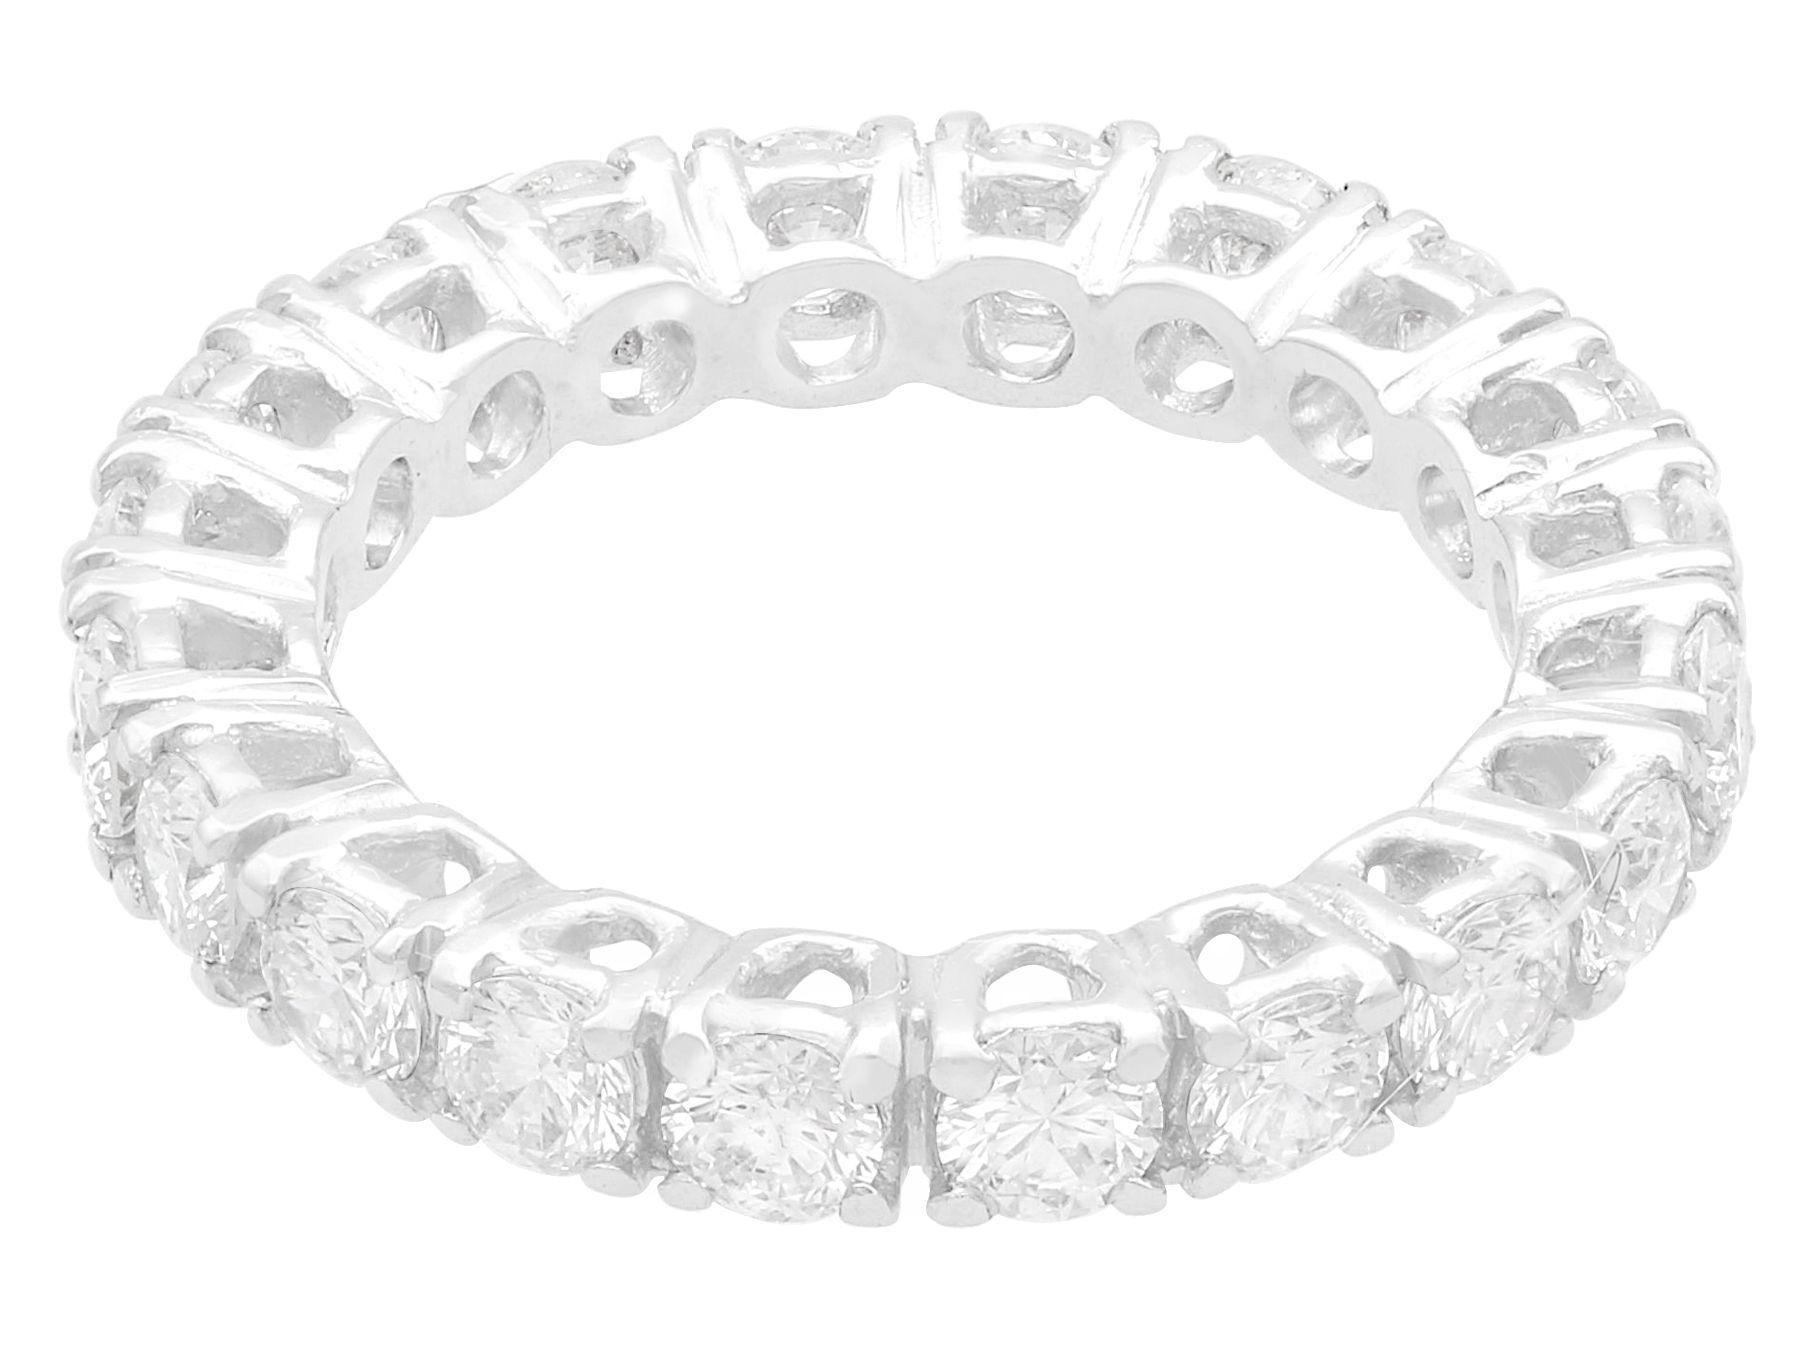 A stunning, fine and impressive vintage 1980s 1.47 carat diamond and 18 karat white gold full eternity ring; part of our diverse diamond jewelry and estate jewelry collections

This stunning, fine and impressive vintage full diamond eternity ring